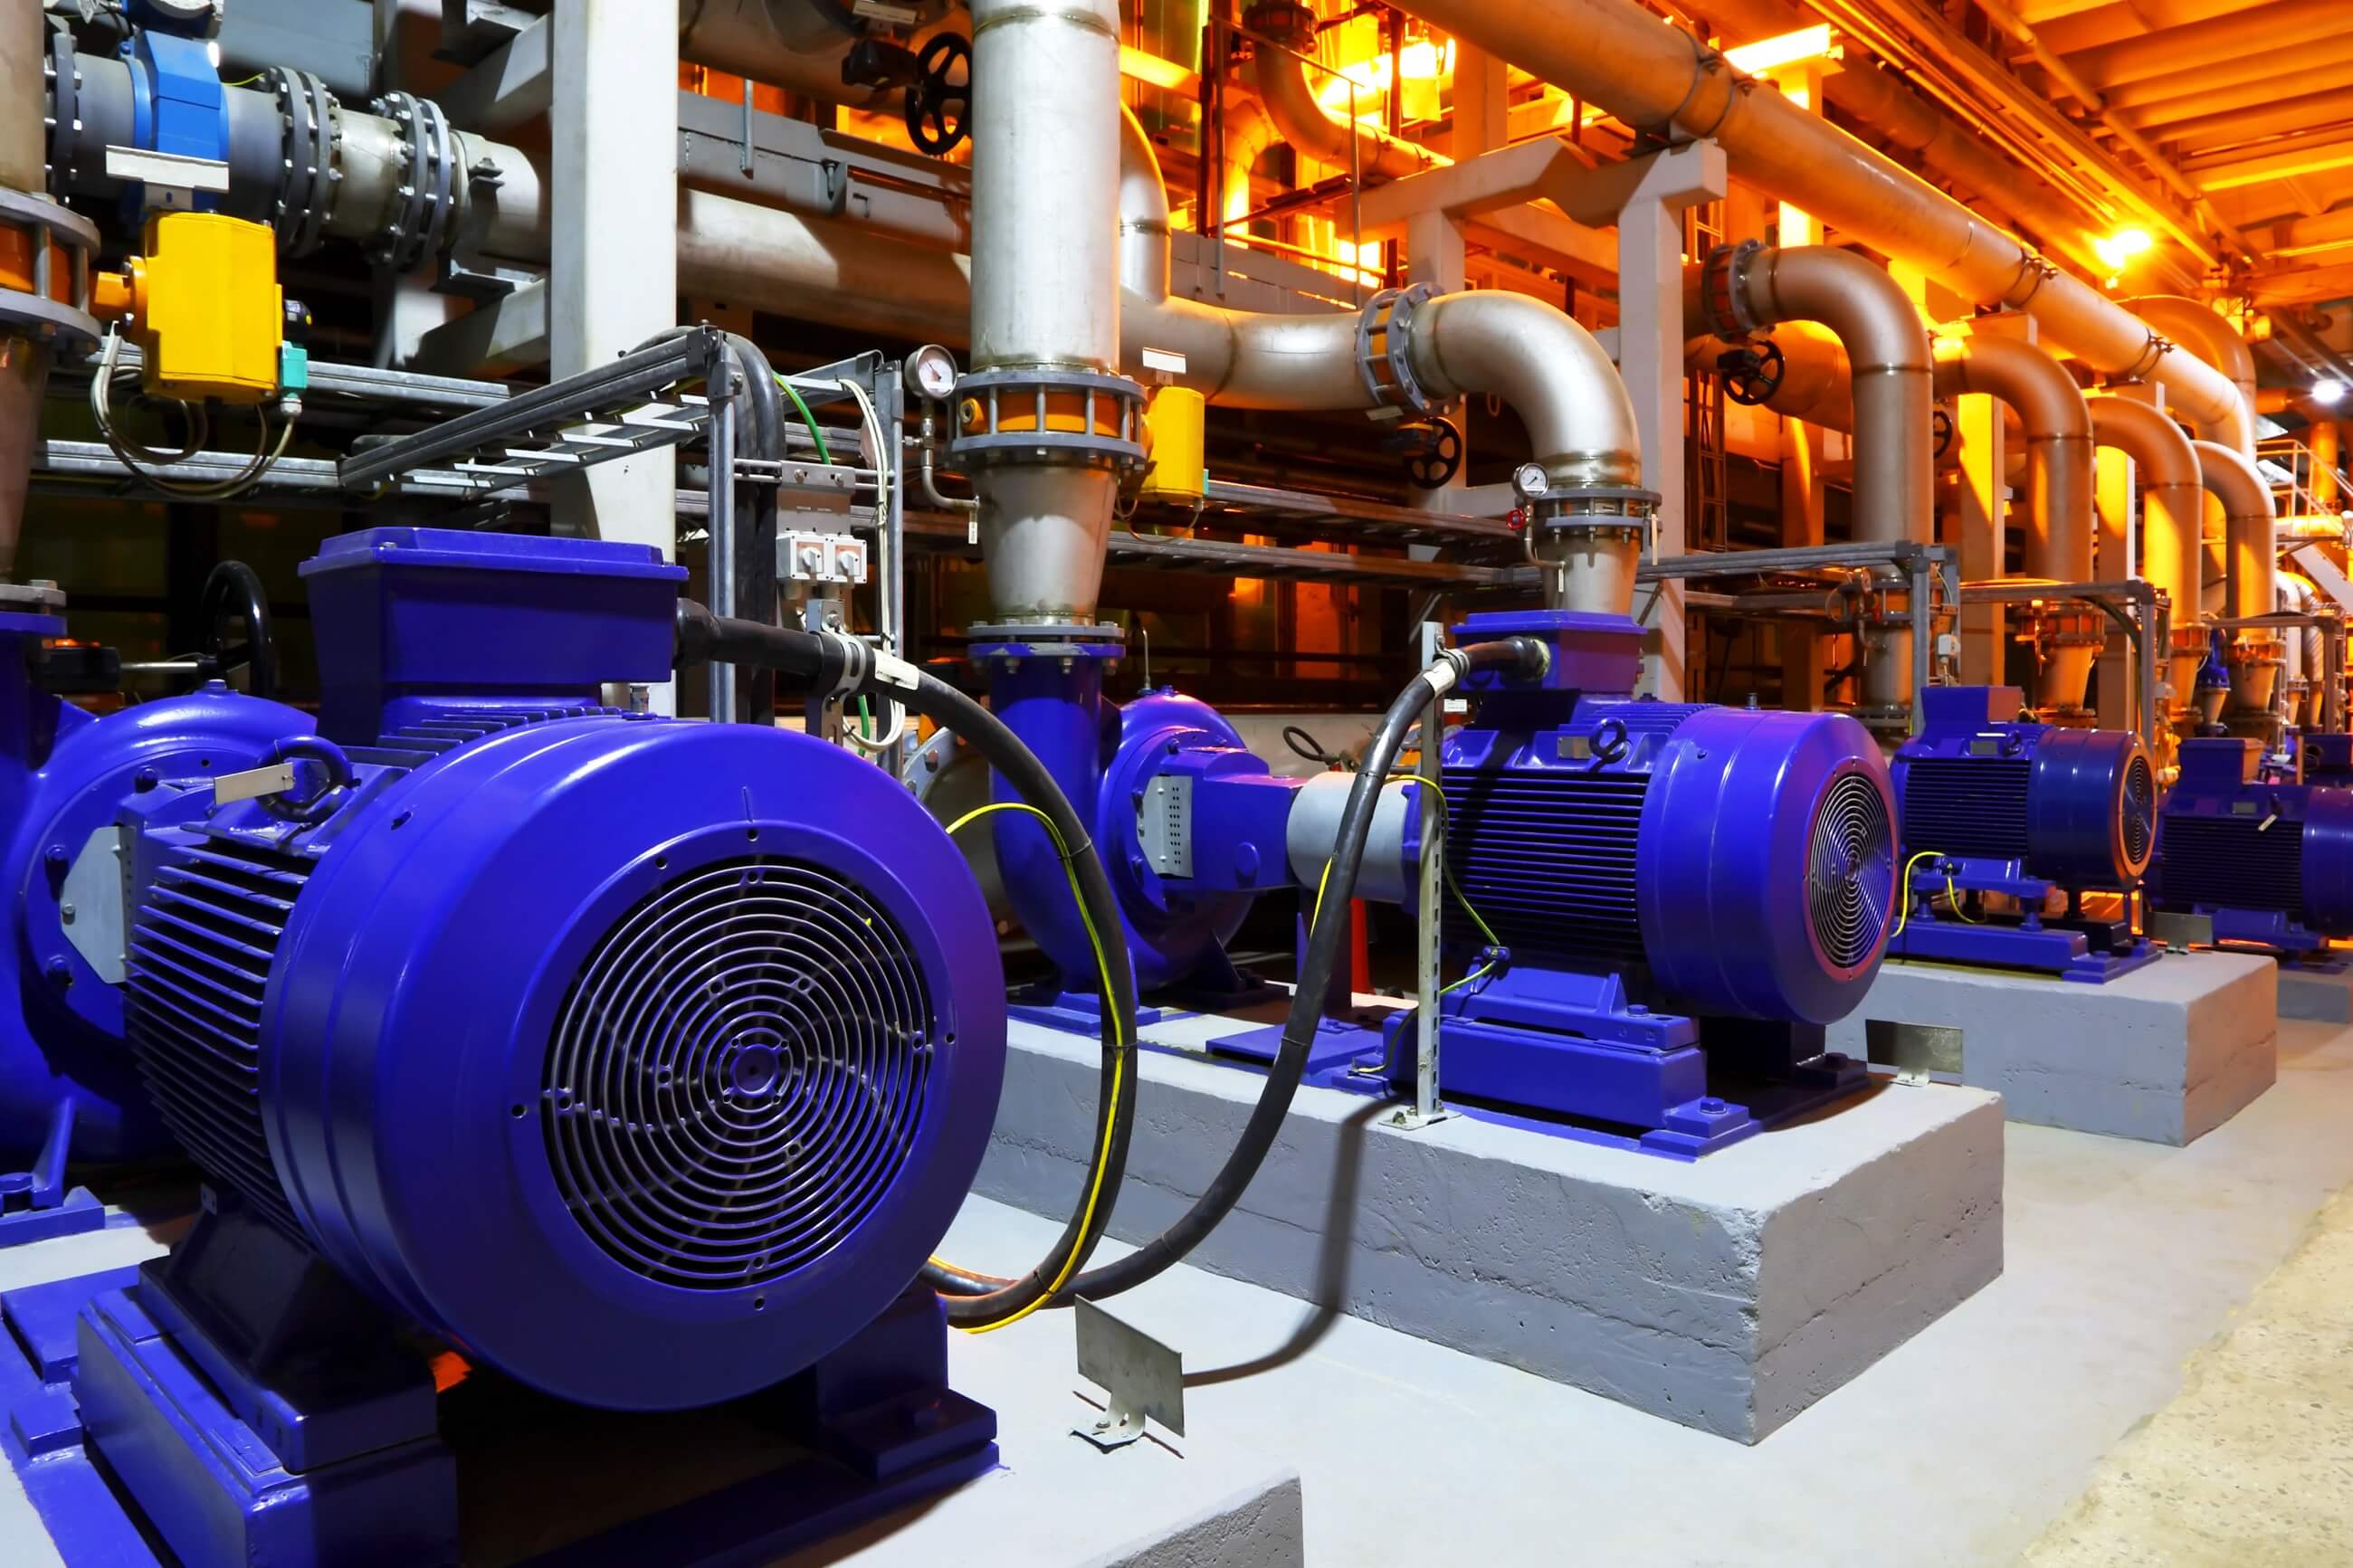 Pump Troubleshooting Recommendations from MEP Engineers